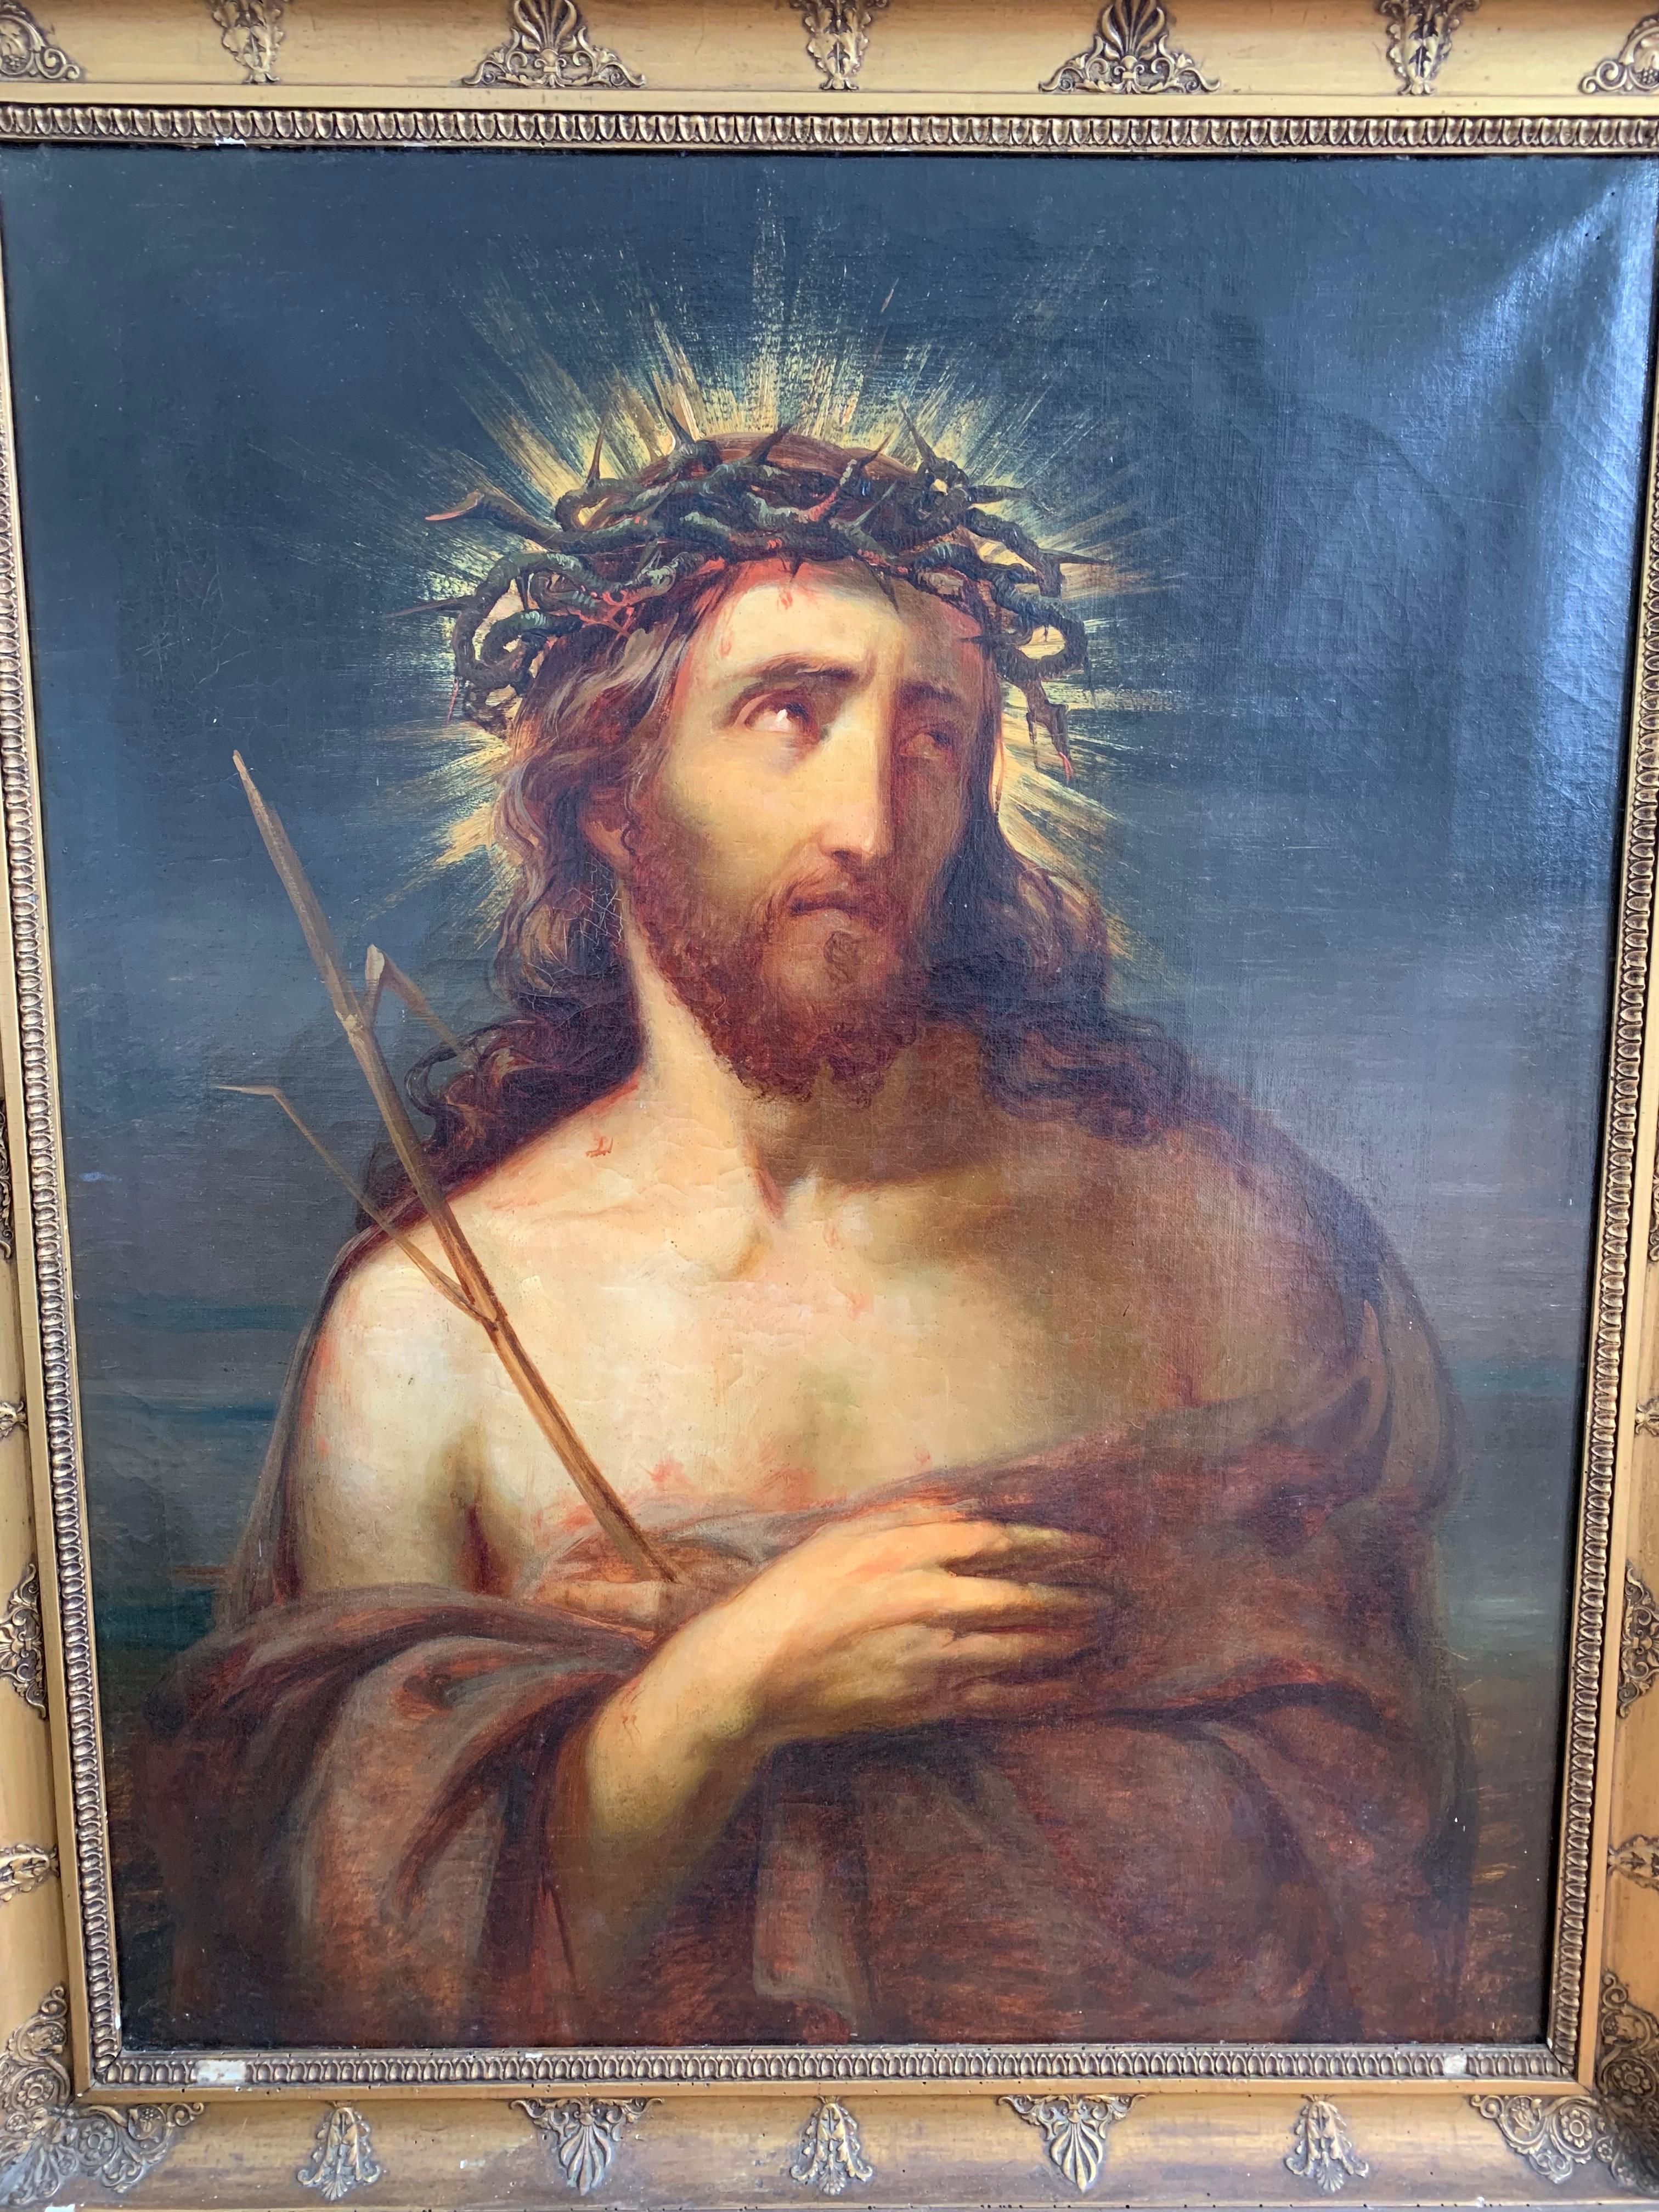 Religious work of art, presented in the original antique frame.

We recently purchased part of a Christian art collection and this unique painting was one of the pride posessions of the former owner. This beautiful and powerful portrait of Christ is